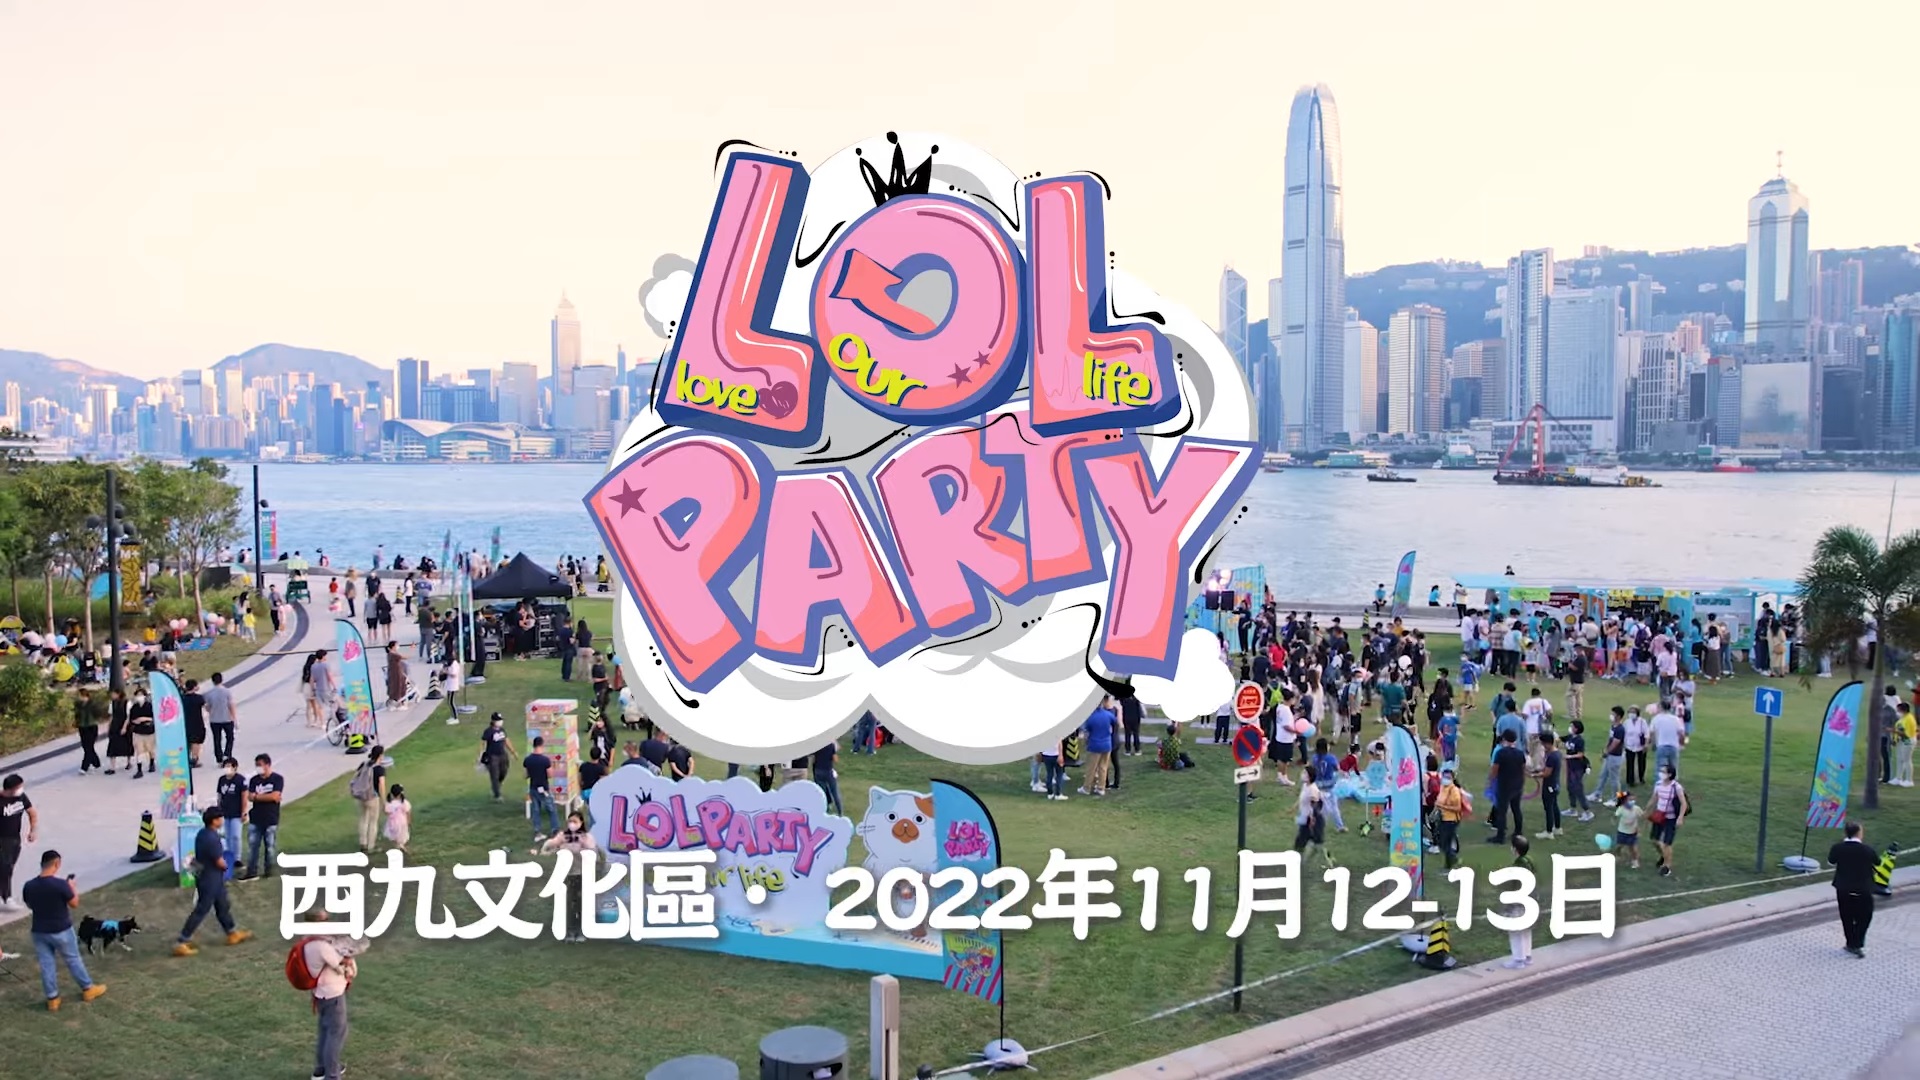 【 West Kowloon Cultural District •「Love Our Life - LOL Party 」! 】